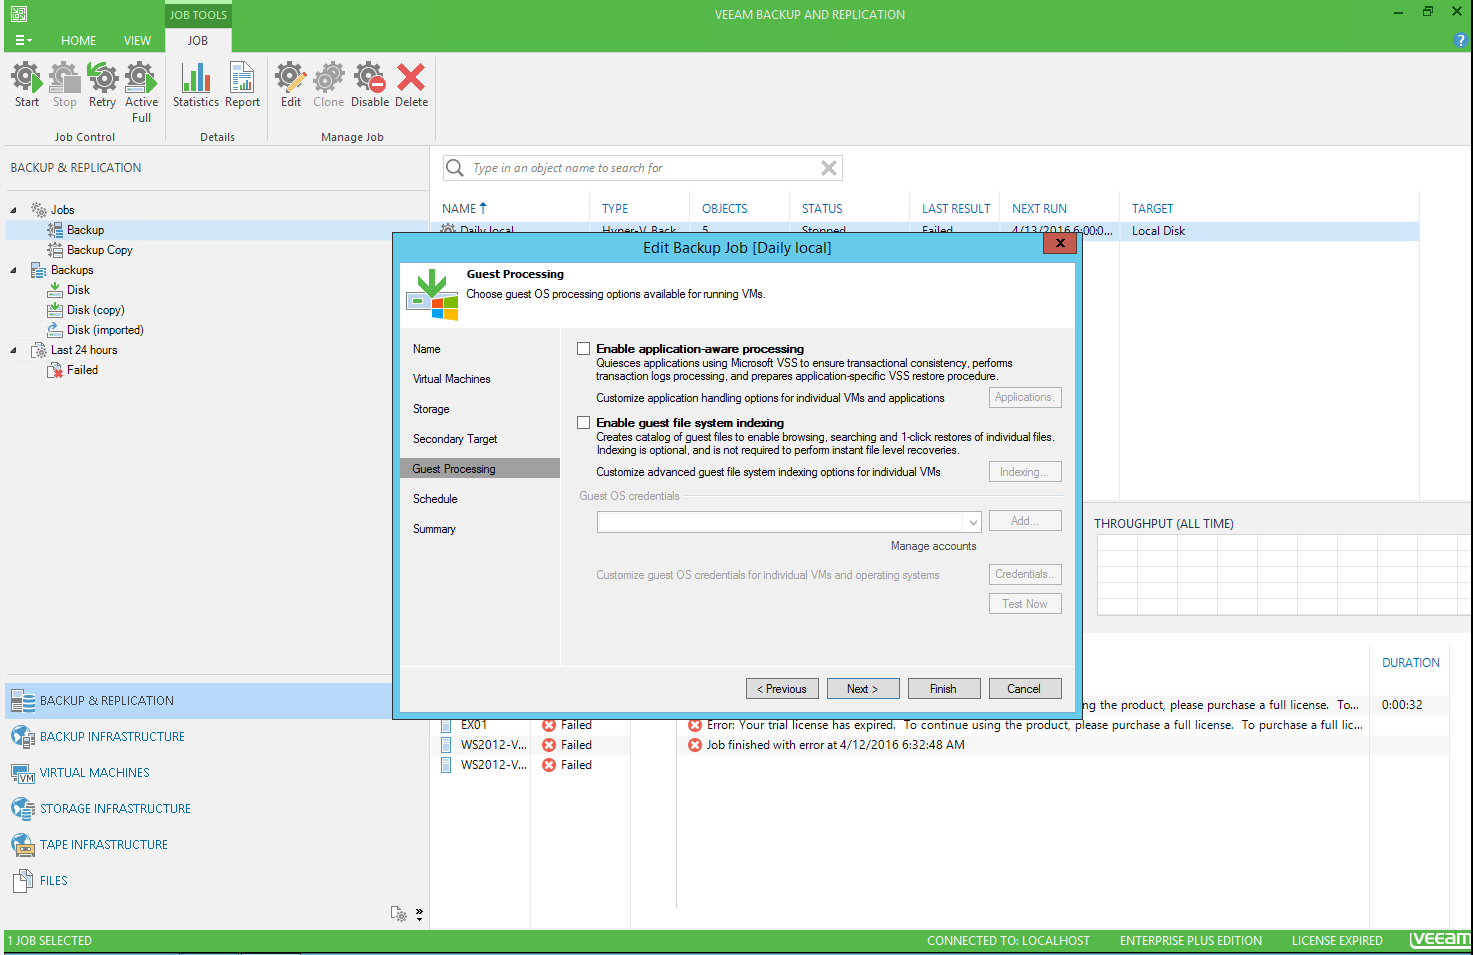 Veeam management console, new backup job guest processing page